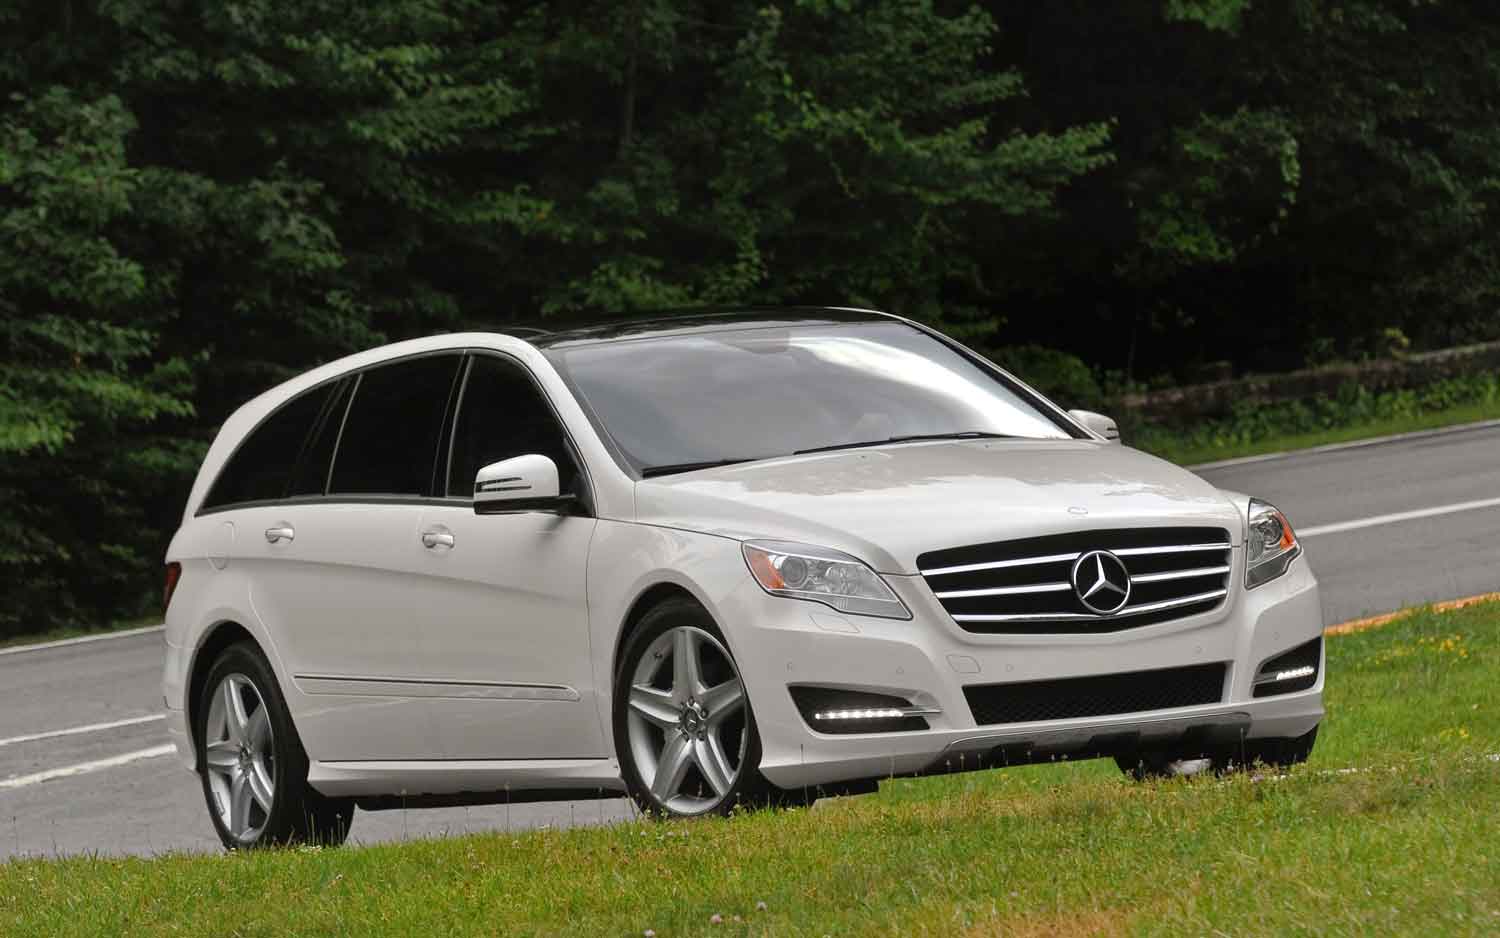 MT Then and Now: 2006-2012 Mercedes-Benz R-Class